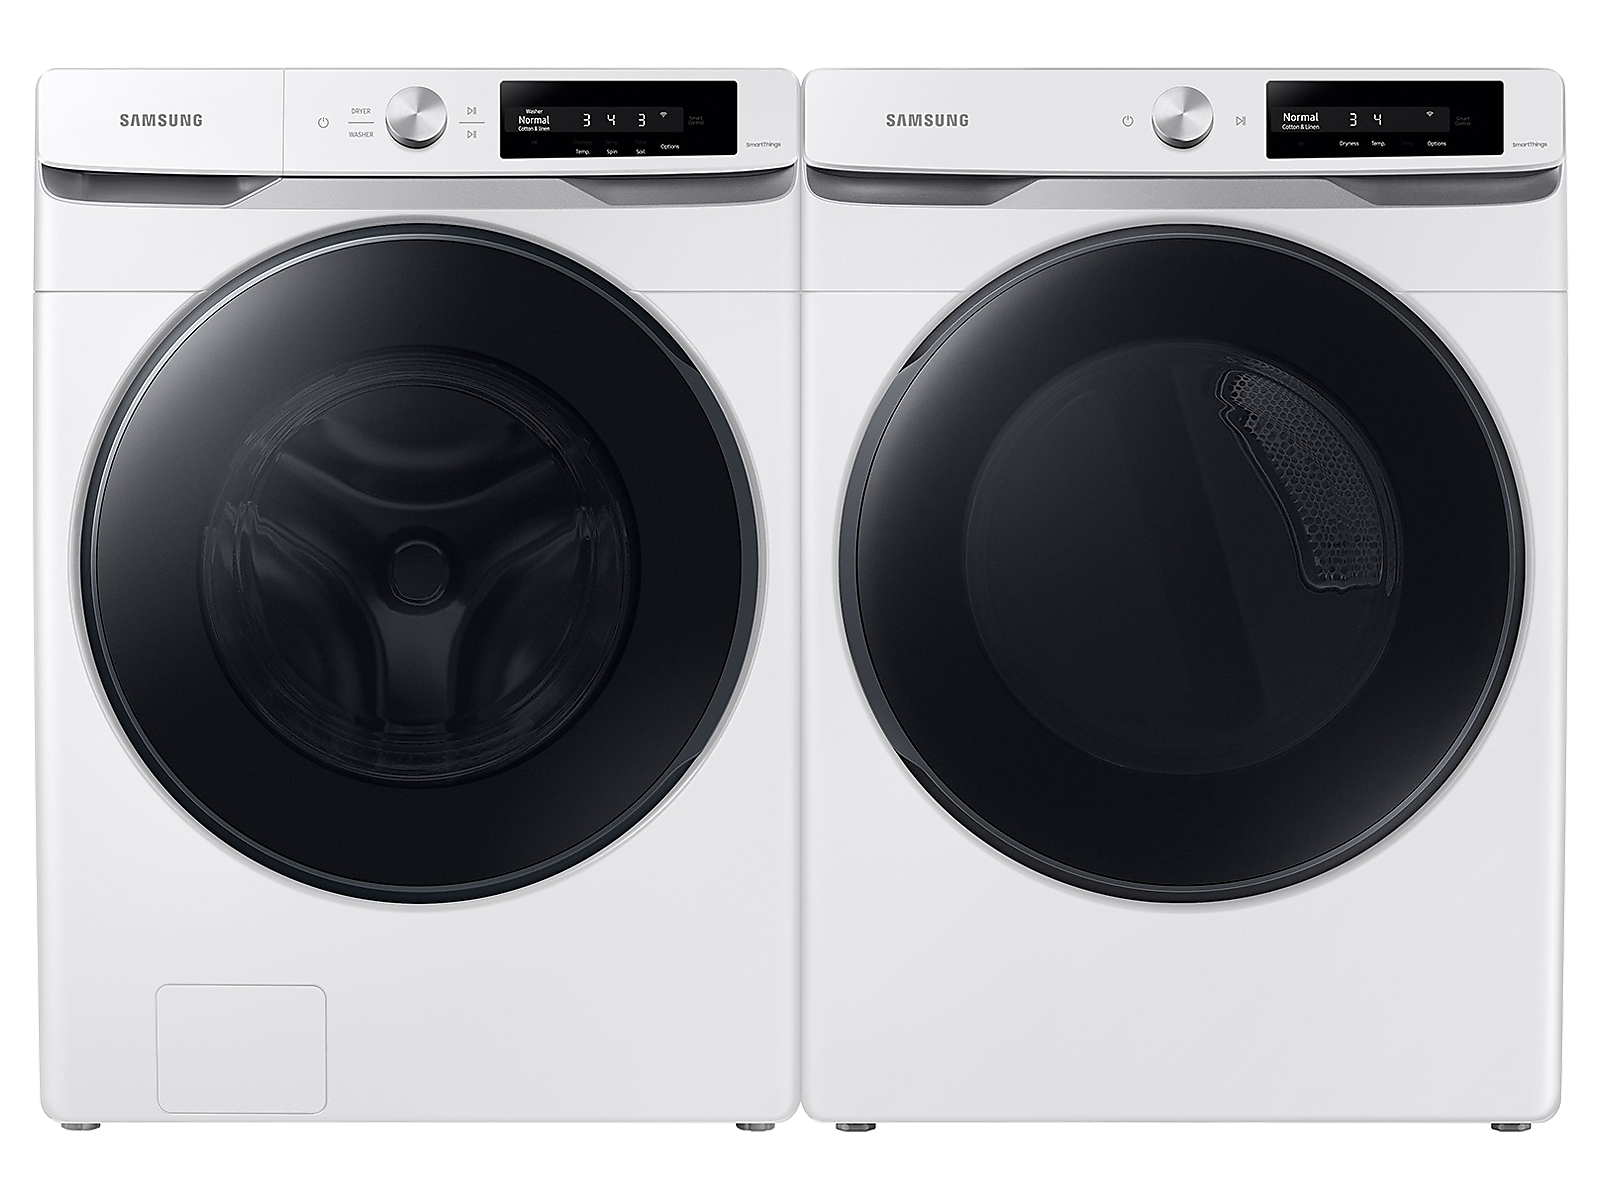 Samsung Smart Dial Front Load Super Speed Wash Washer and Smart Dial Super Speed Dry Electric Dryer package in White(BNDL-1646290912278) photo